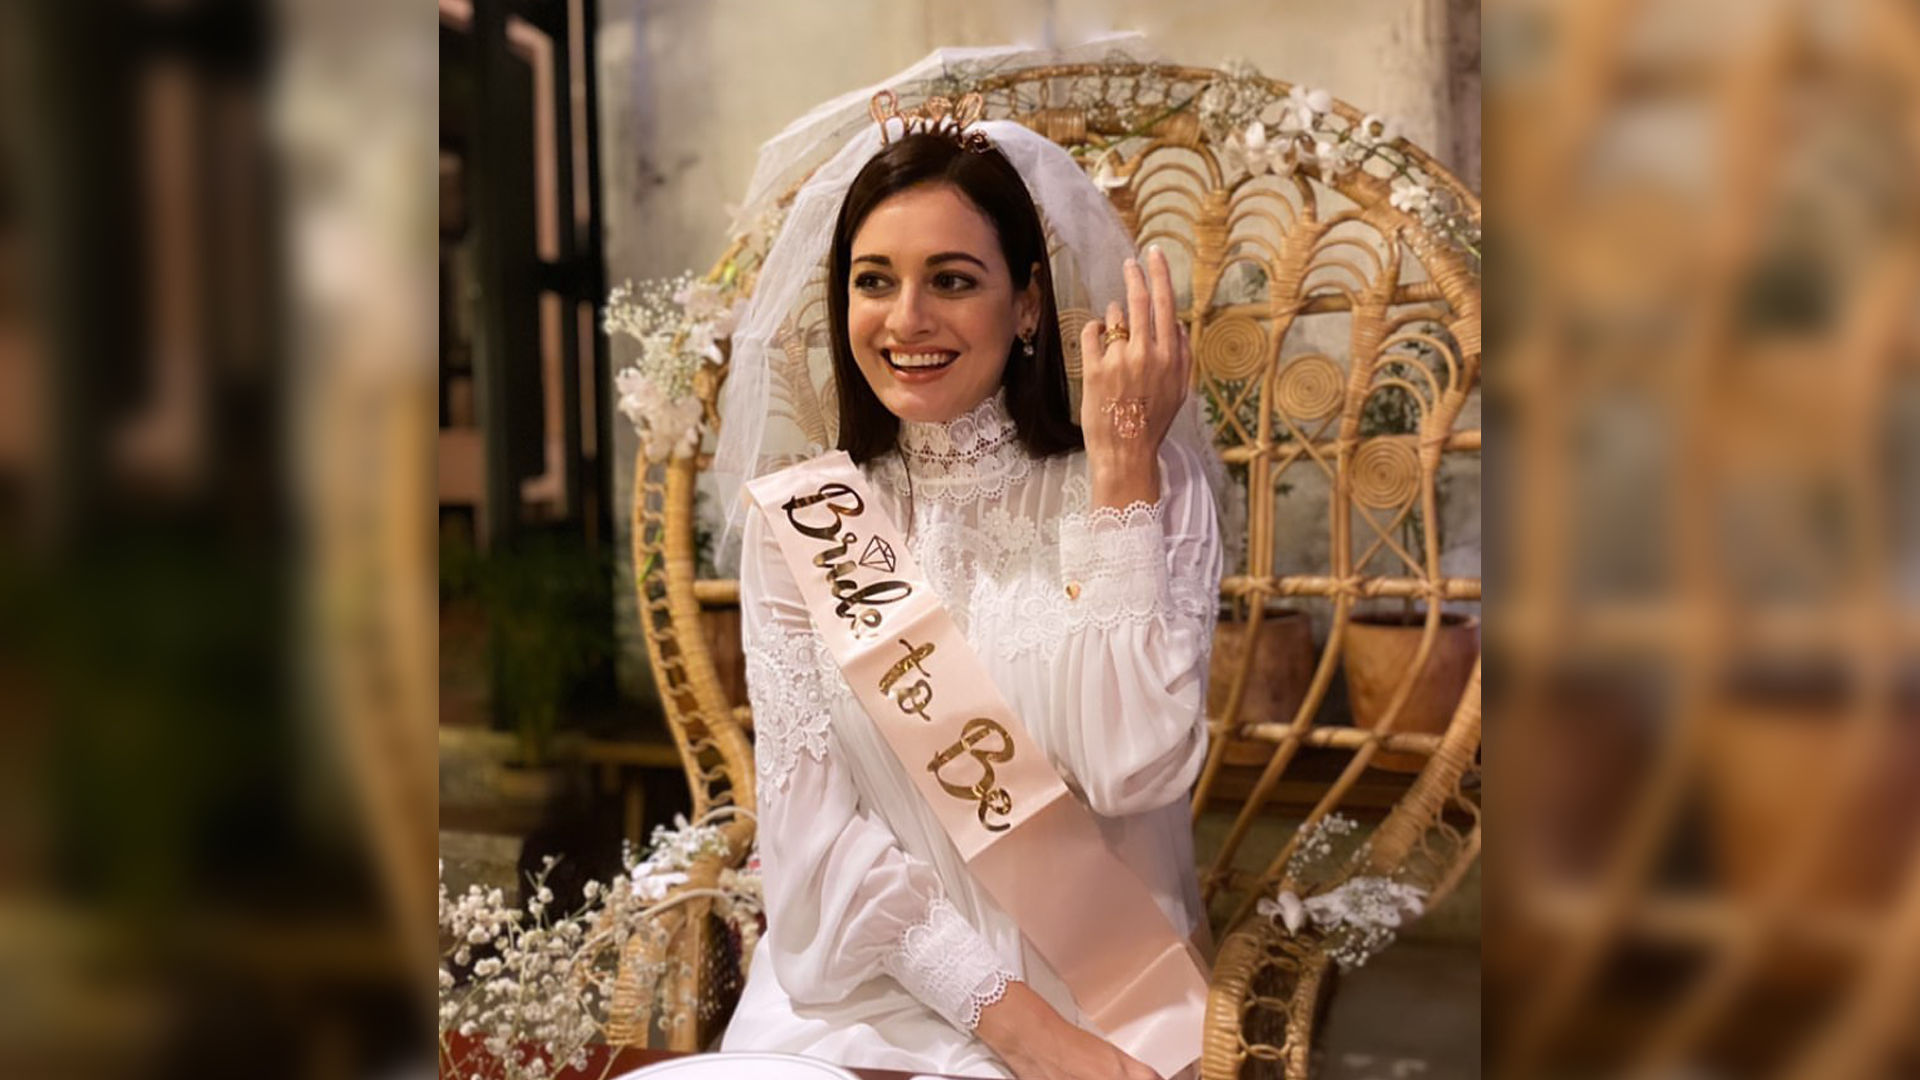 Here comes the ravishing bride: Dia Mirza flaunts her mehendi with a lovable message